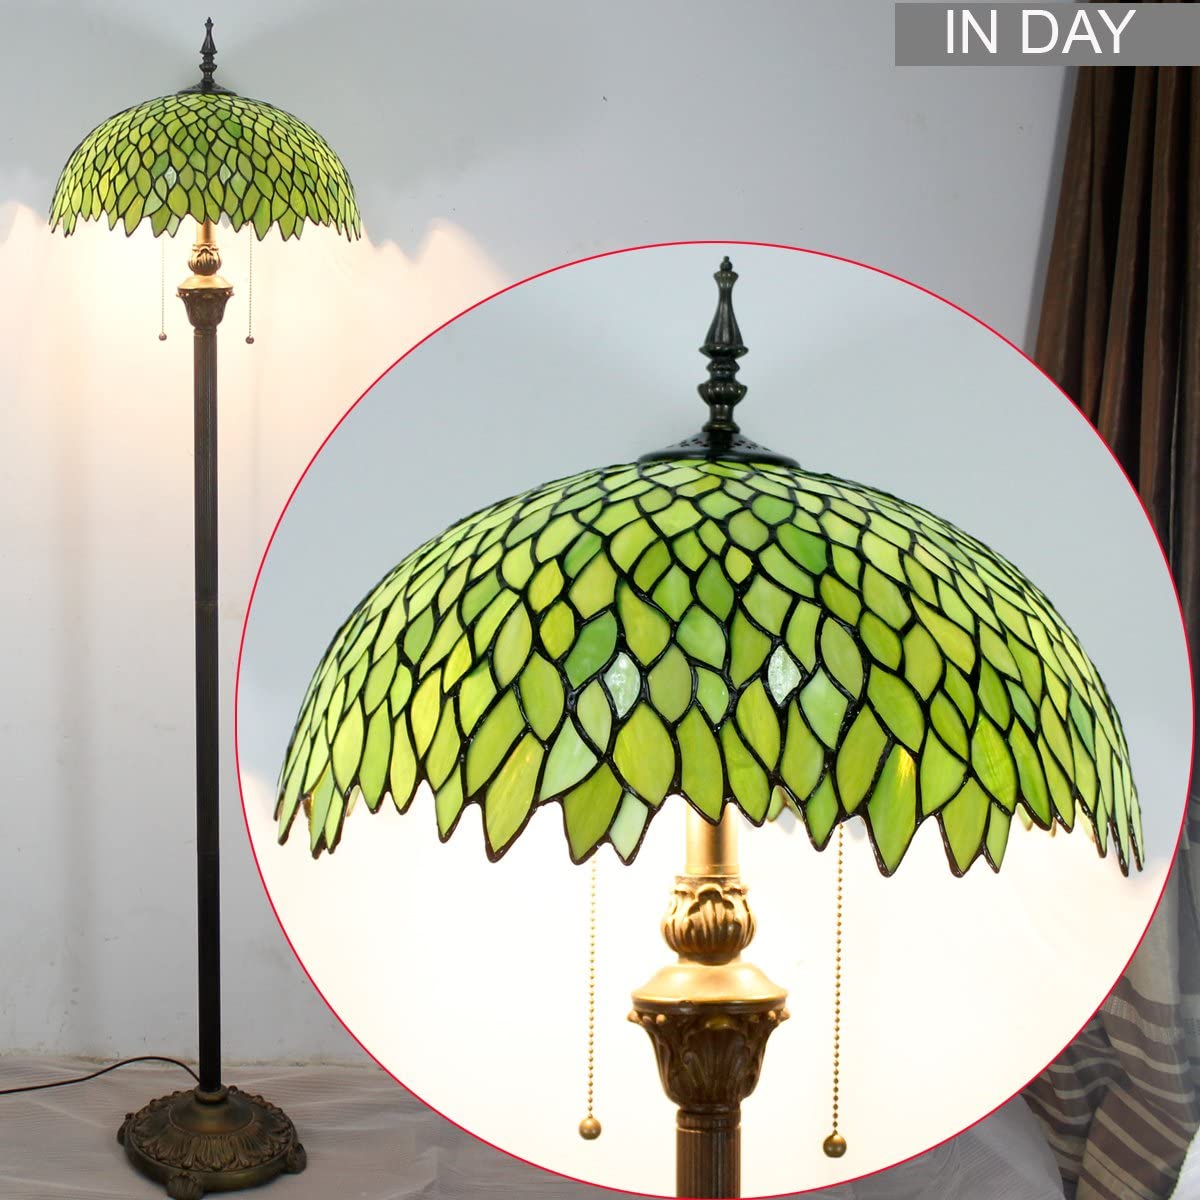 BBNBDMZ  Floor Lamp Green Wisteria Stained Glass Standing Reading Light 16X16X64 Inches Antique Style Pole Corner Lamp Decor Bedroom Living Room  Office S523 Series